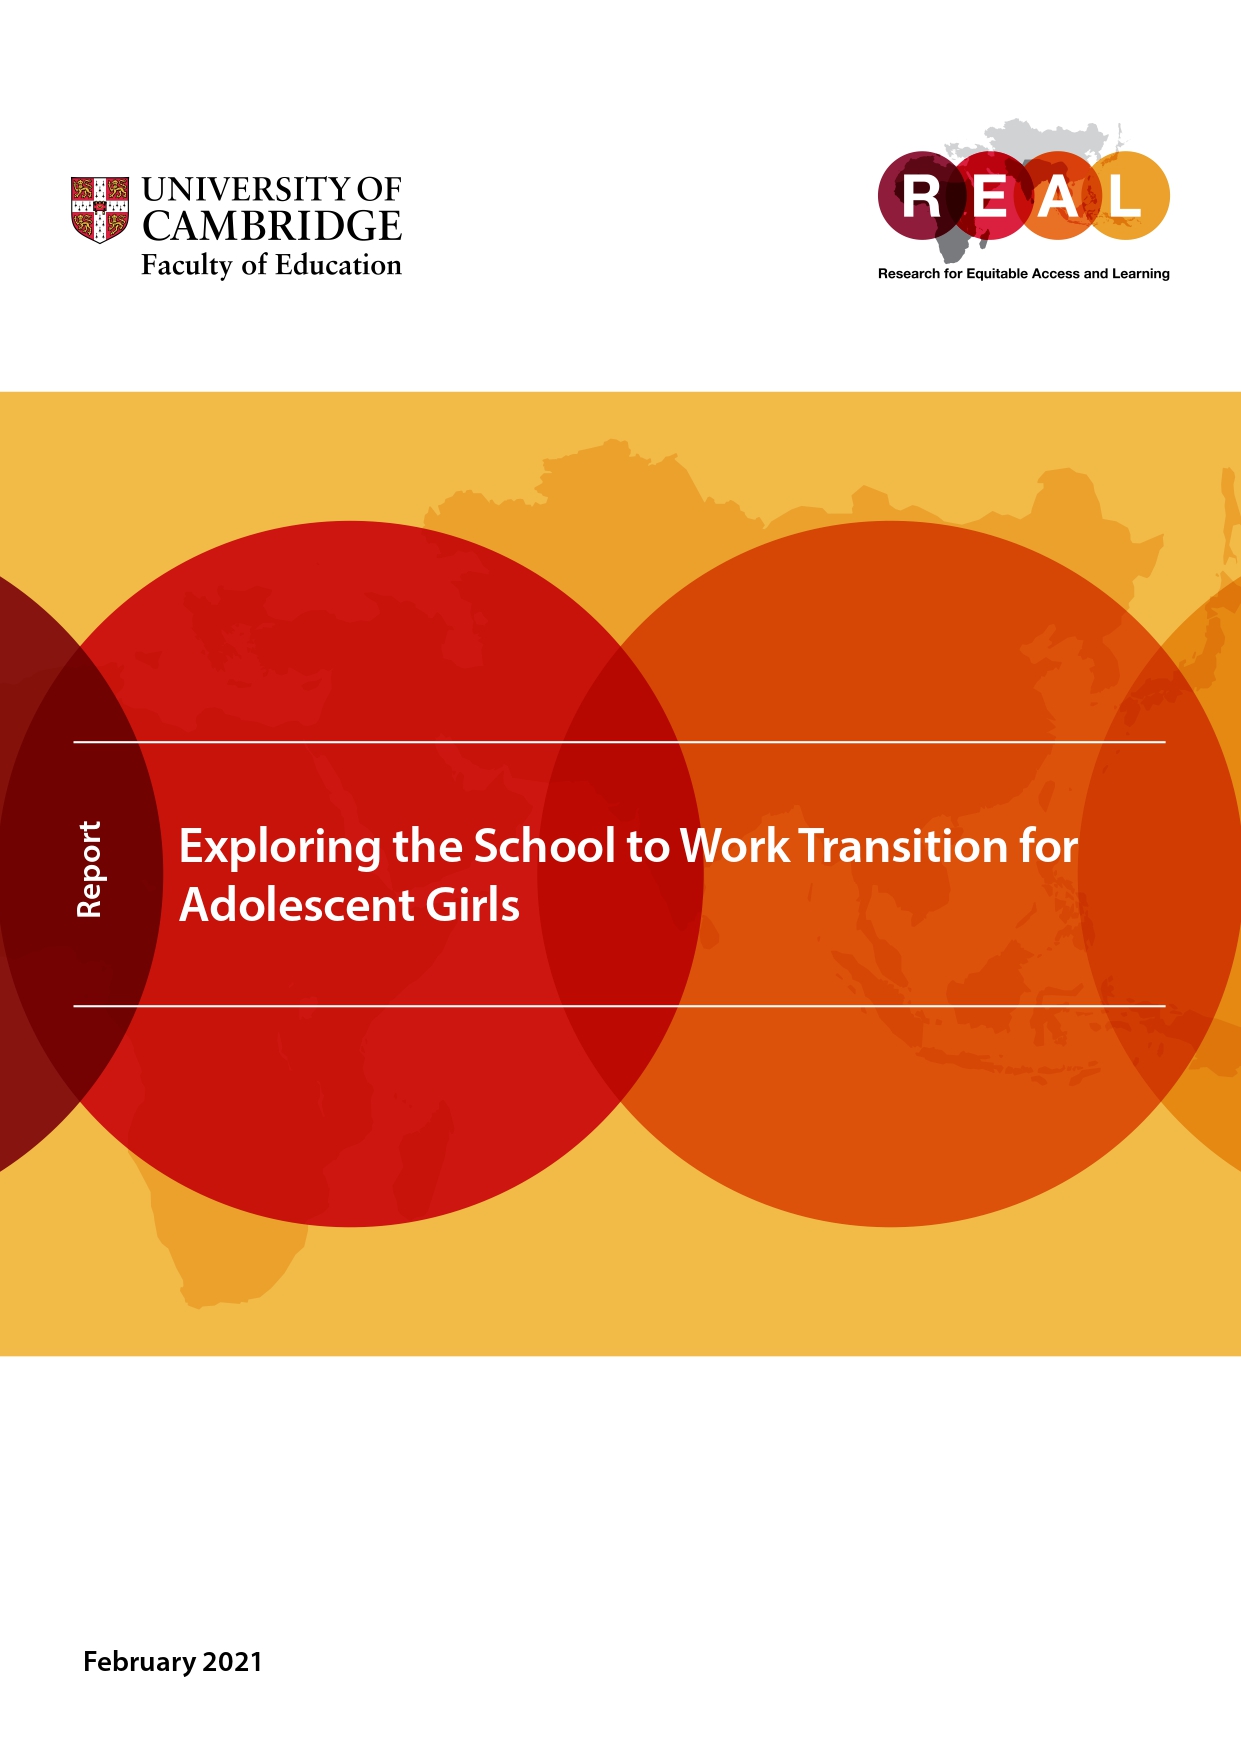 Exploring the School to Work Transition for Adolescent Girls